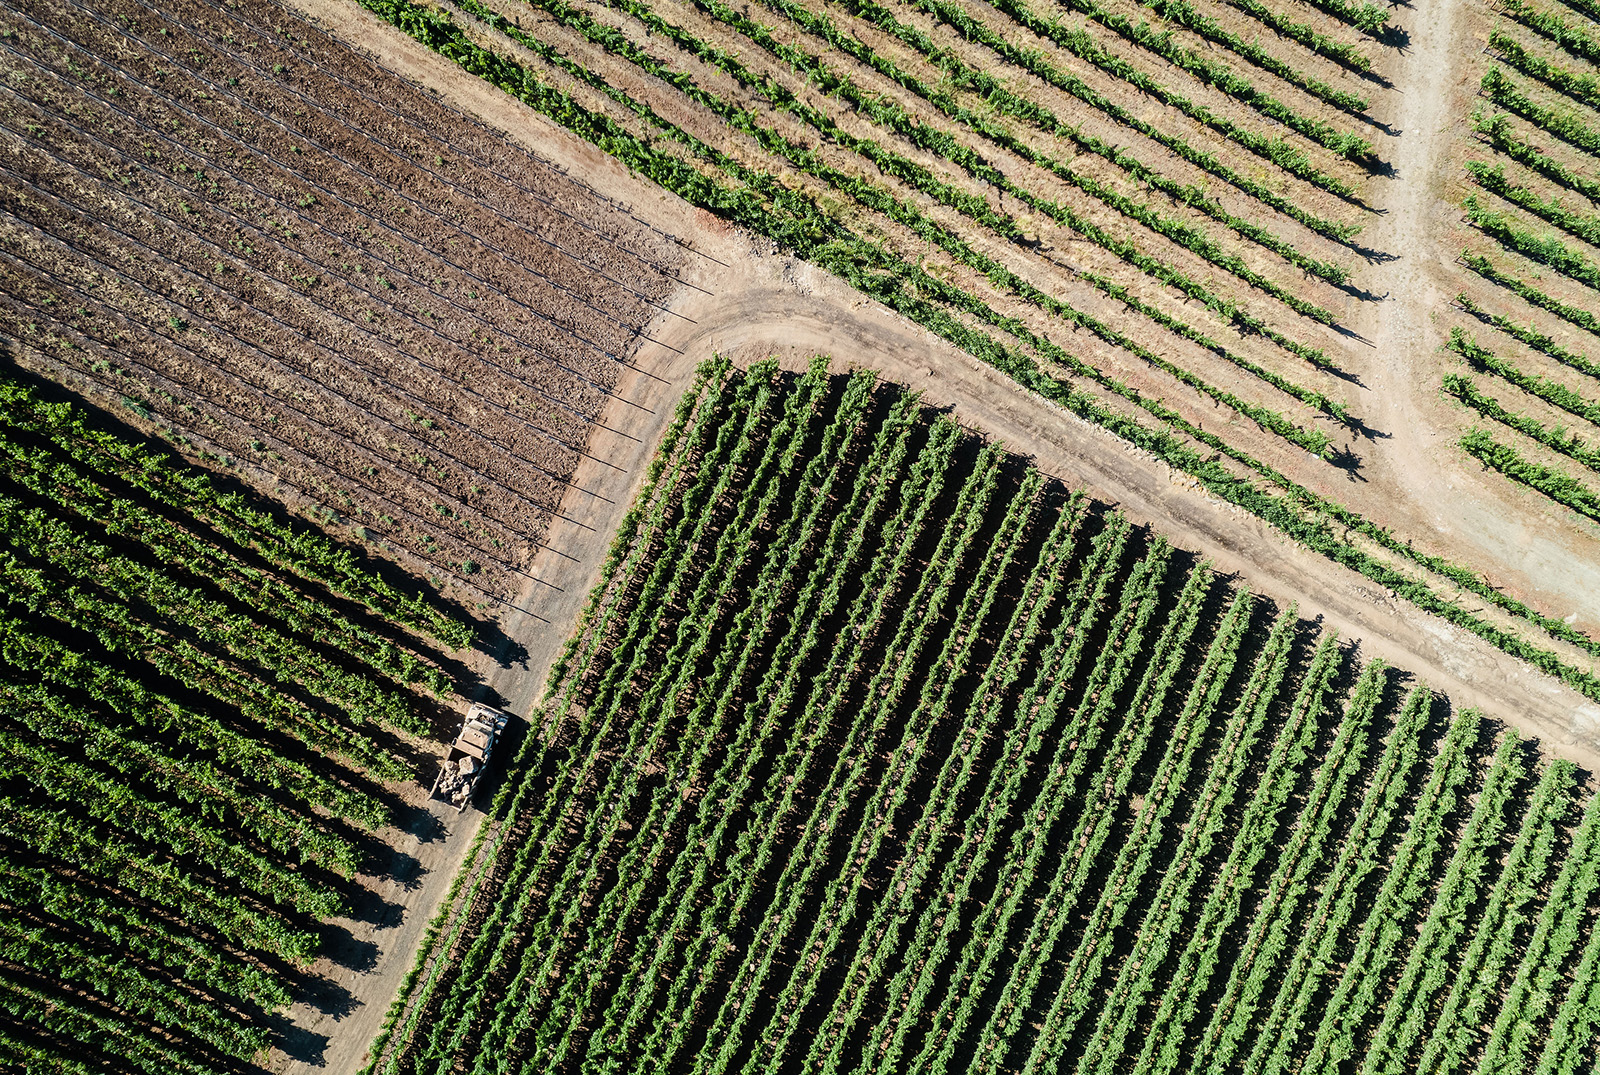 Aerial photo of truck coming to a corner on a road through vineyard